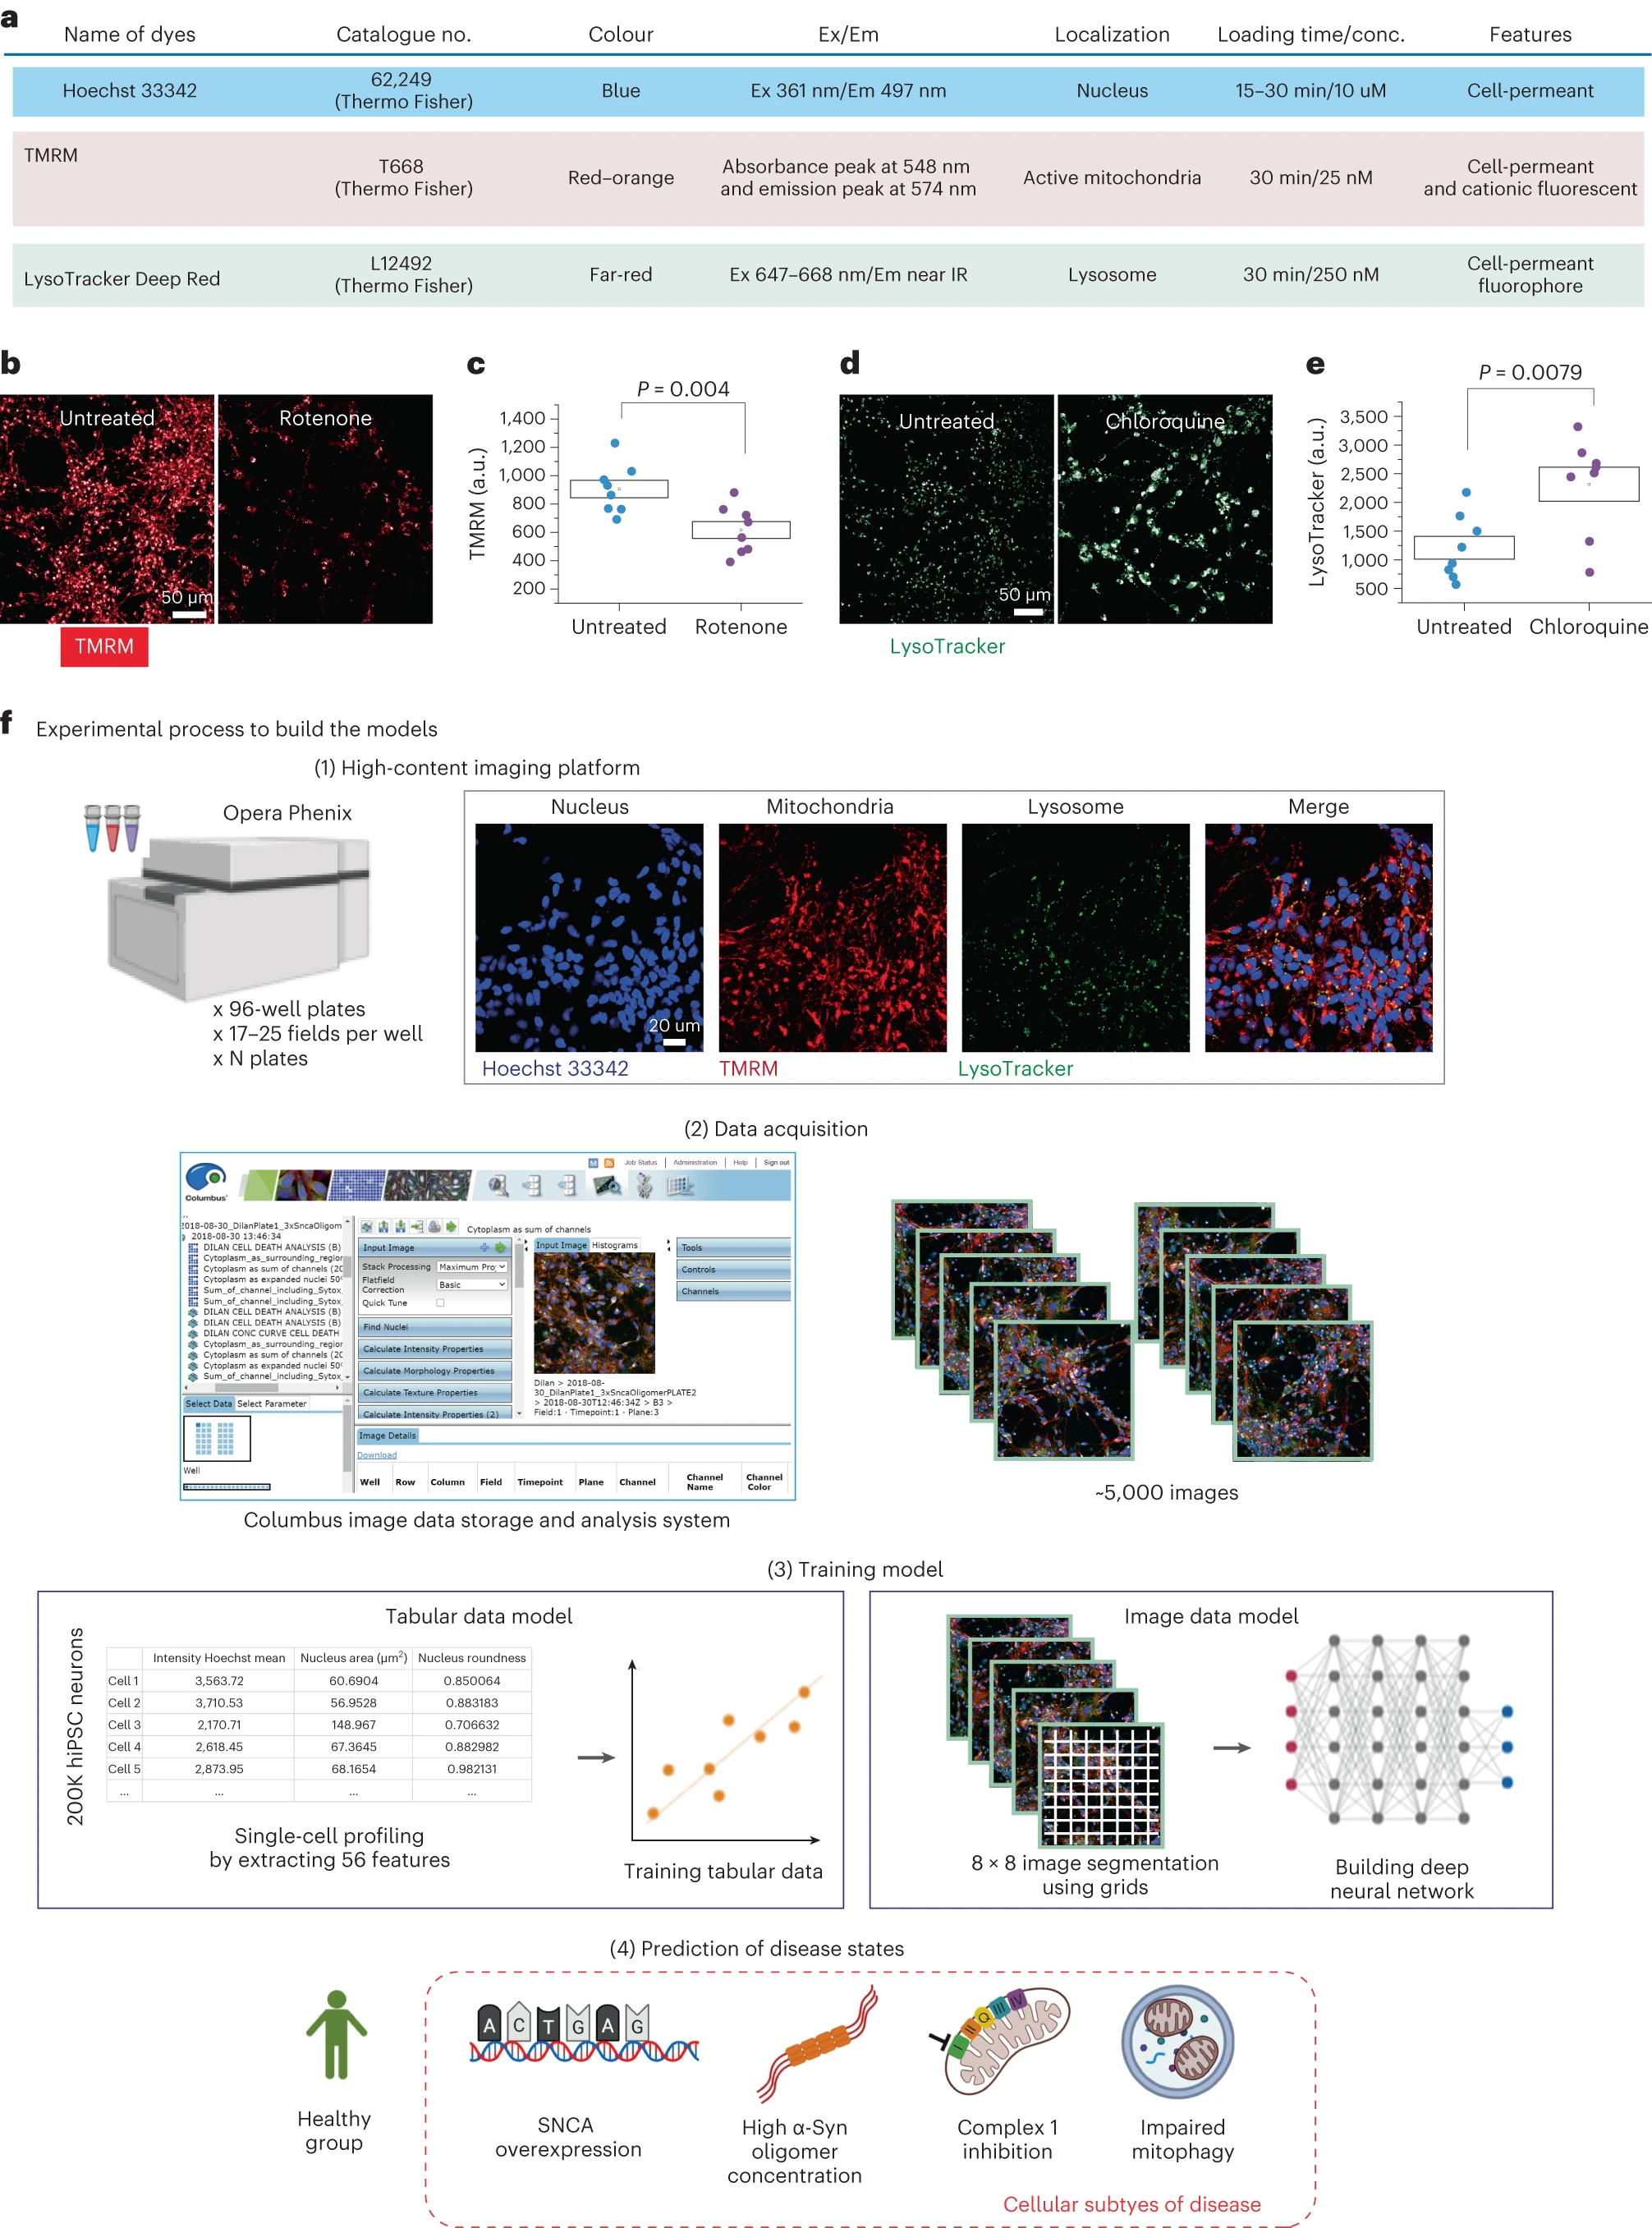 Workflow to develop a classifier to make a prediction of cellular subtypes in PD